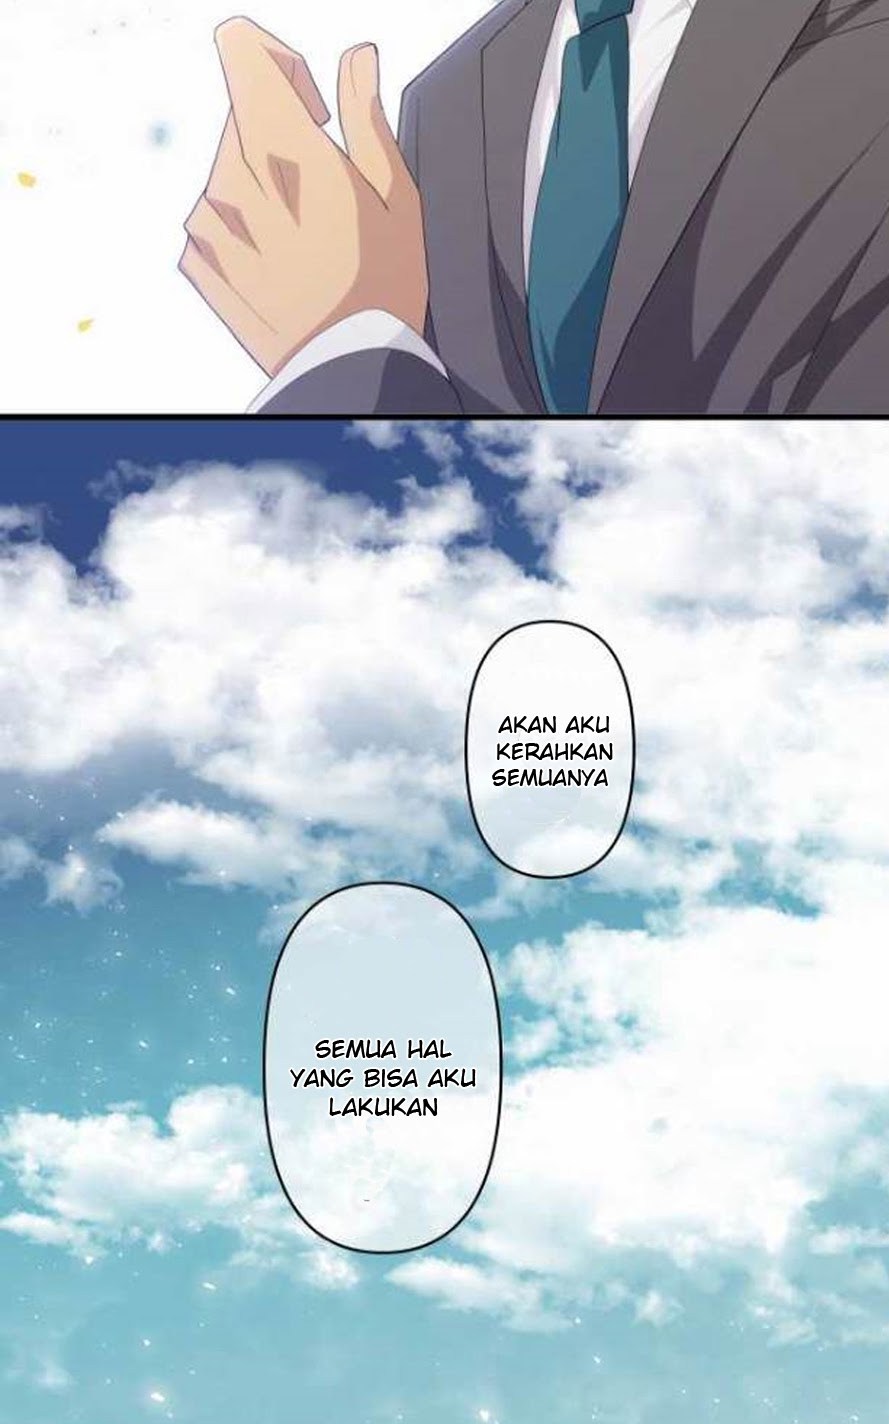 ReLIFE Chapter 221